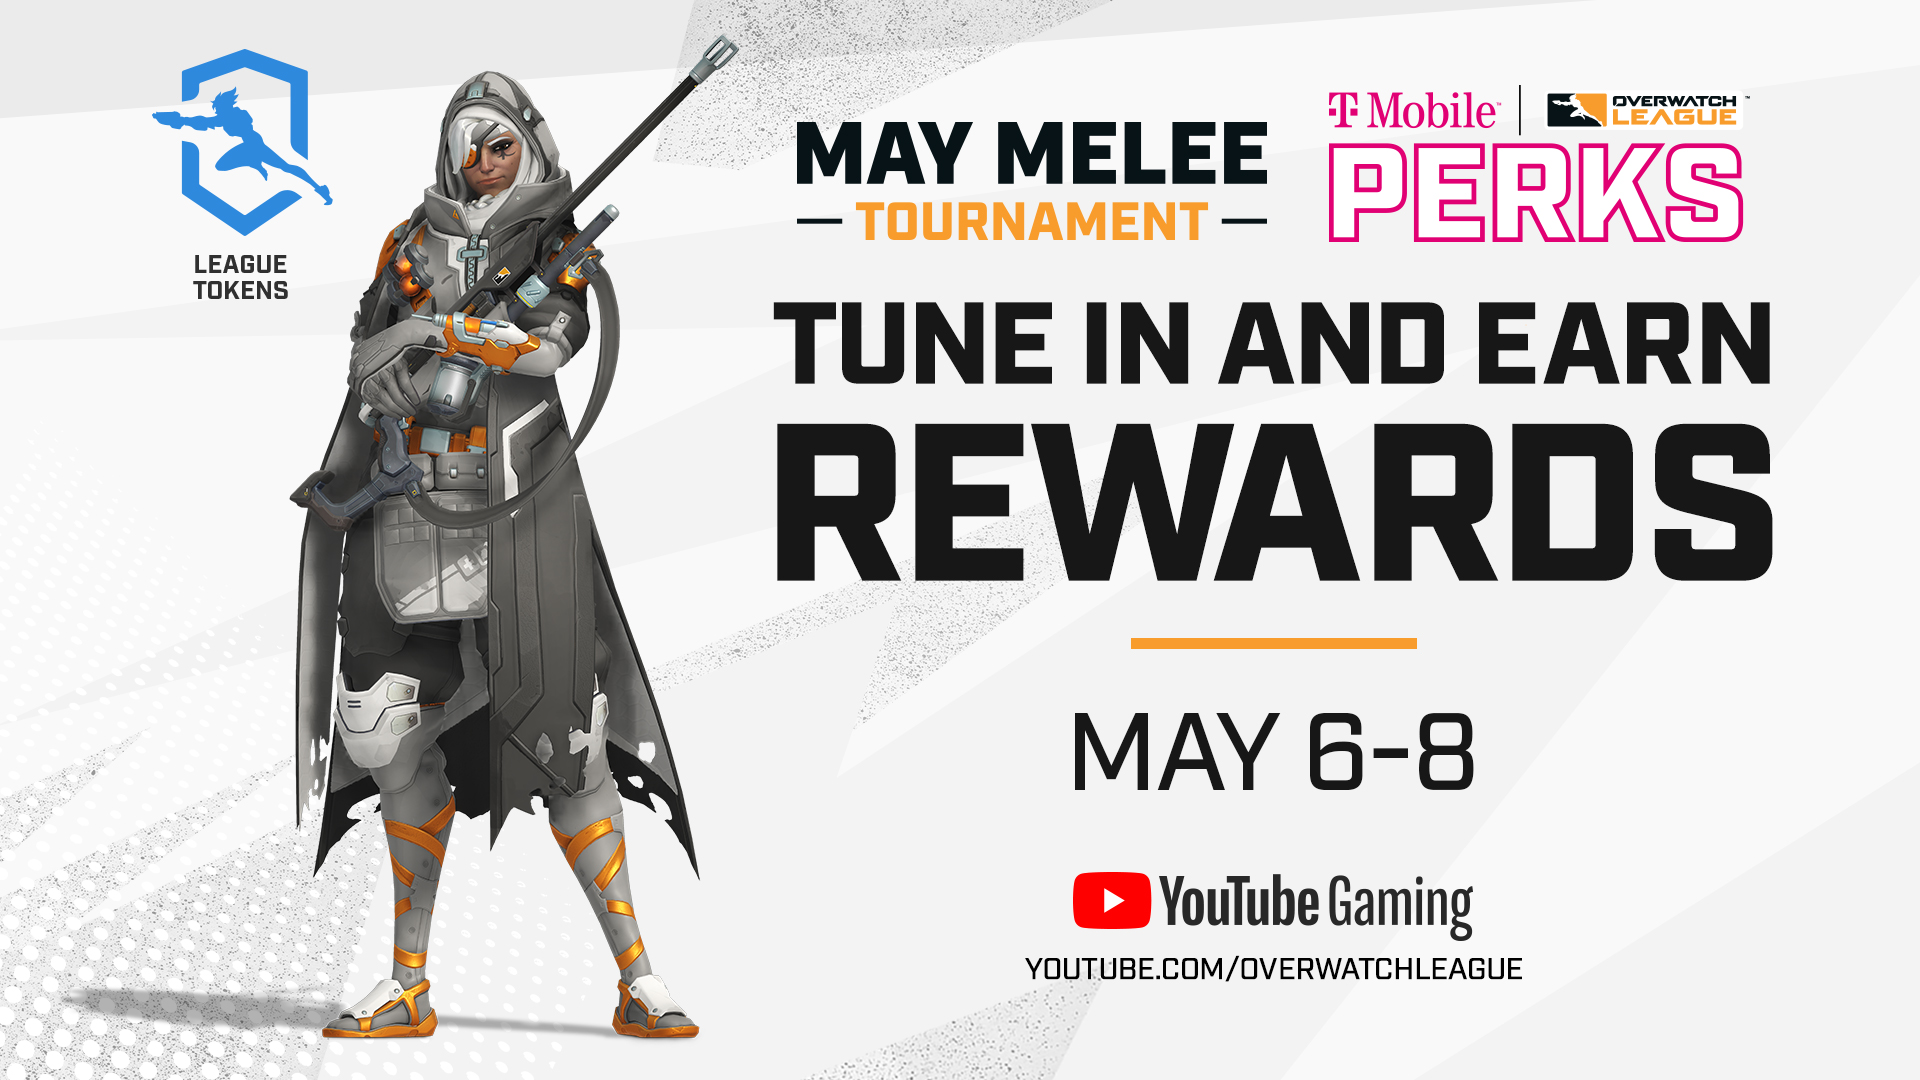 Overwatch League It S The Final Day Of The May Melee And That Means It S The Final Day To Get Your Ana Skin Link Your Account And Tune Into The Finals